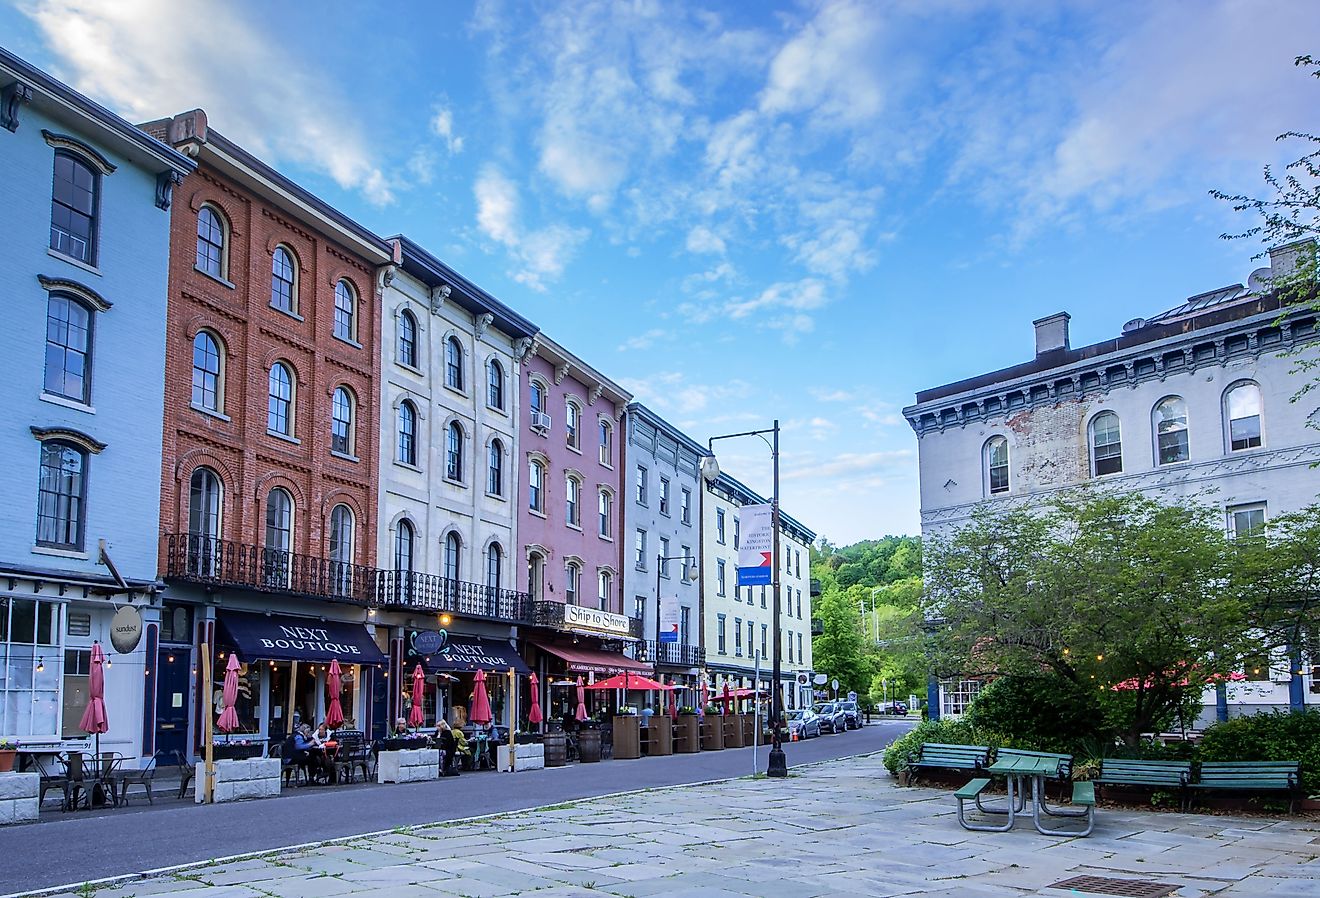 A landscape view of the shops and restaurants on West Strand Street in The Rondout, Kingston’s historic waterfront. Image credit Brian Logan Photography via Shutterstock.